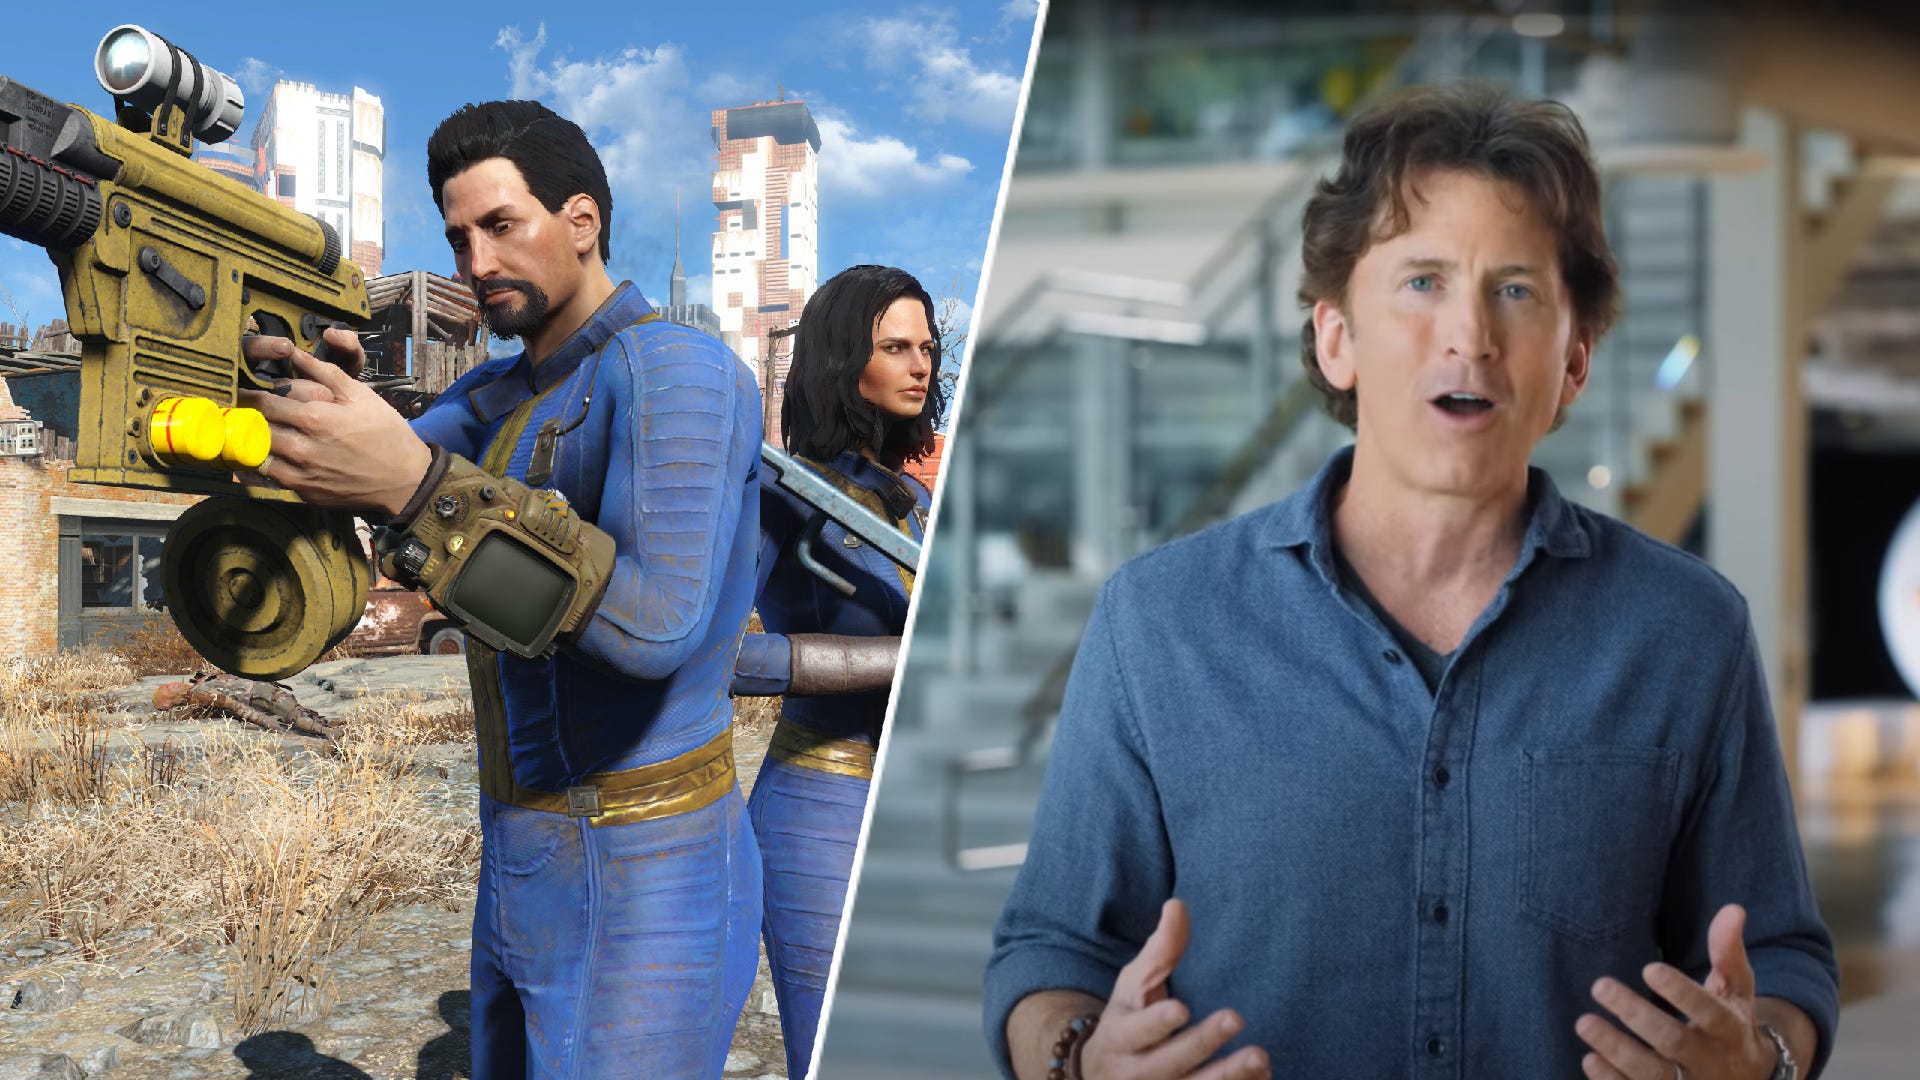 “We don’t want to wait that long either” – As we all crave fresh Fallout, Todd Howard says Bethesda’s looking to find ways to up its output